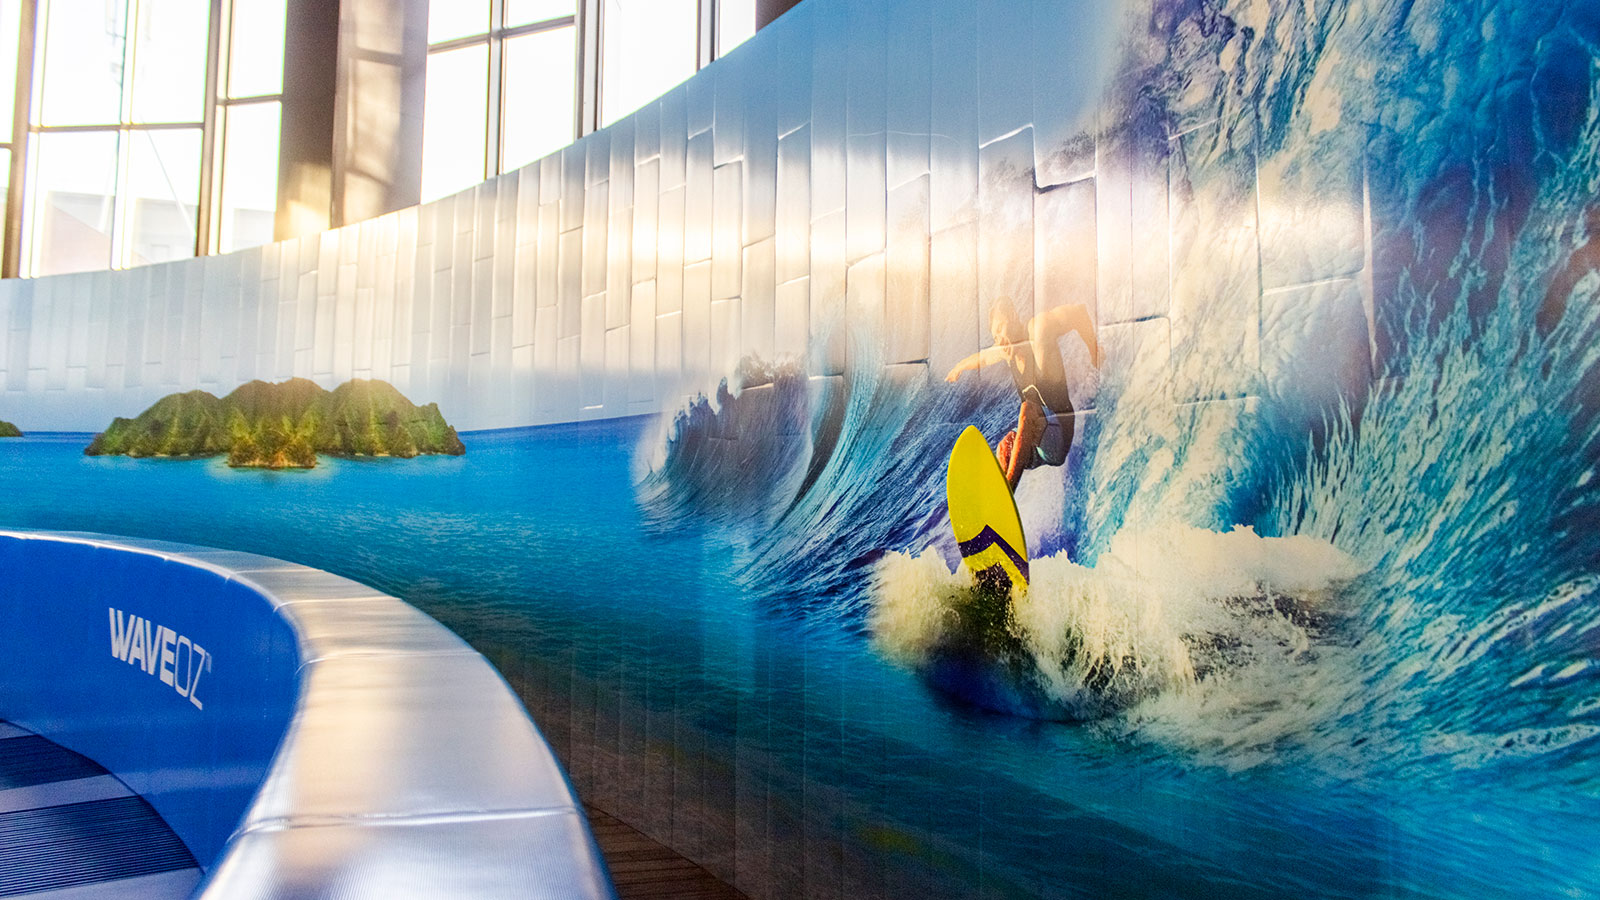 Flow House custom indoor wall sign with a surfer graphic made of opaque vinyl for branding